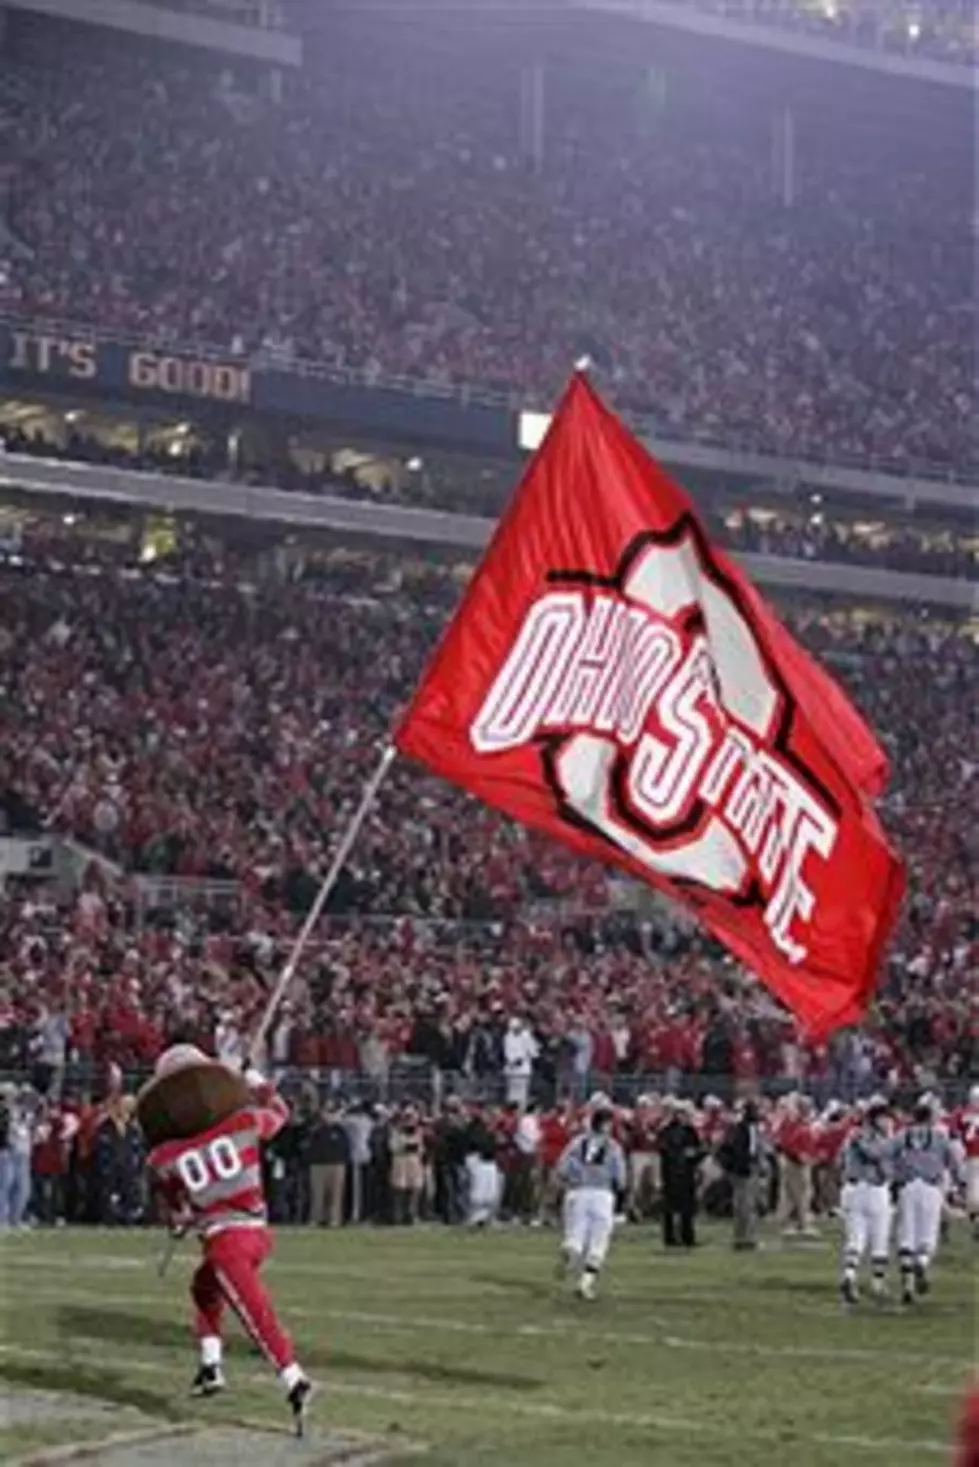 Ohio State falls out of AP poll after 103 Straight